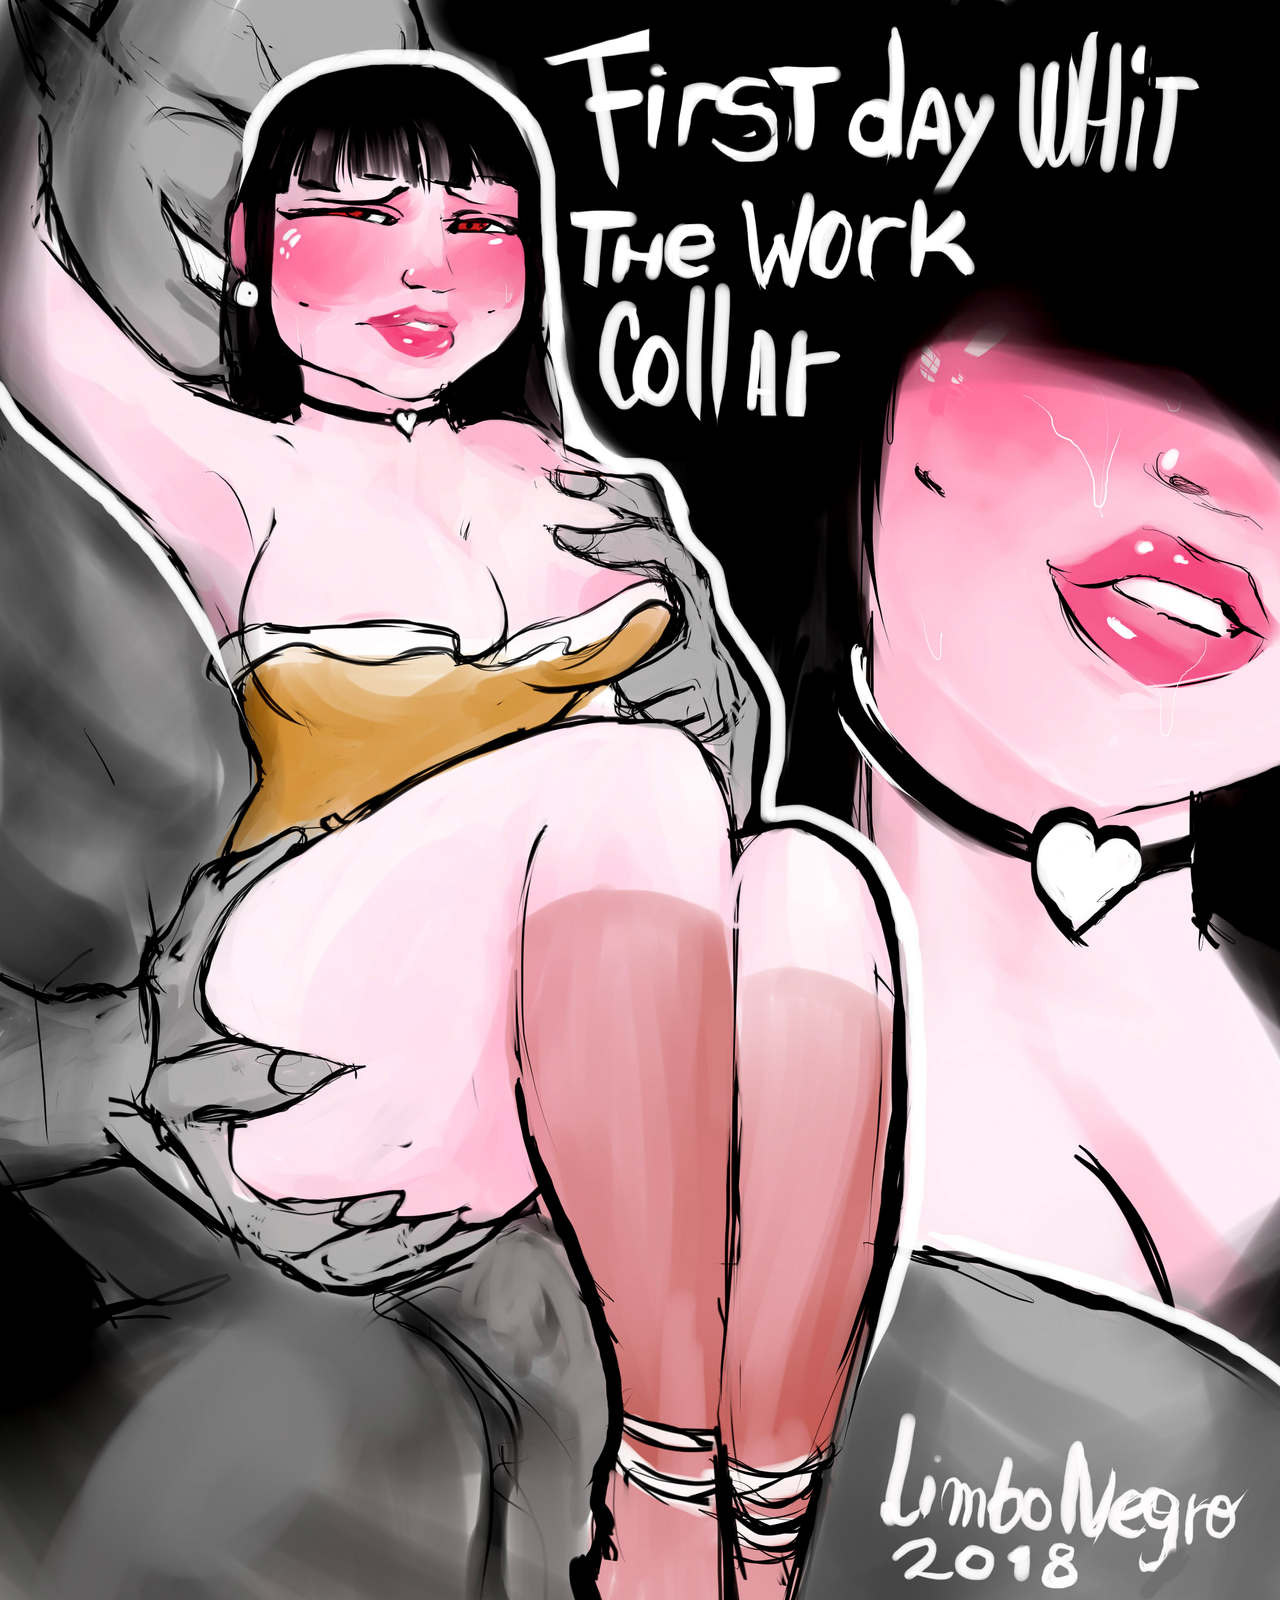 First day whit the collar work by LimboNegro Porn Comics